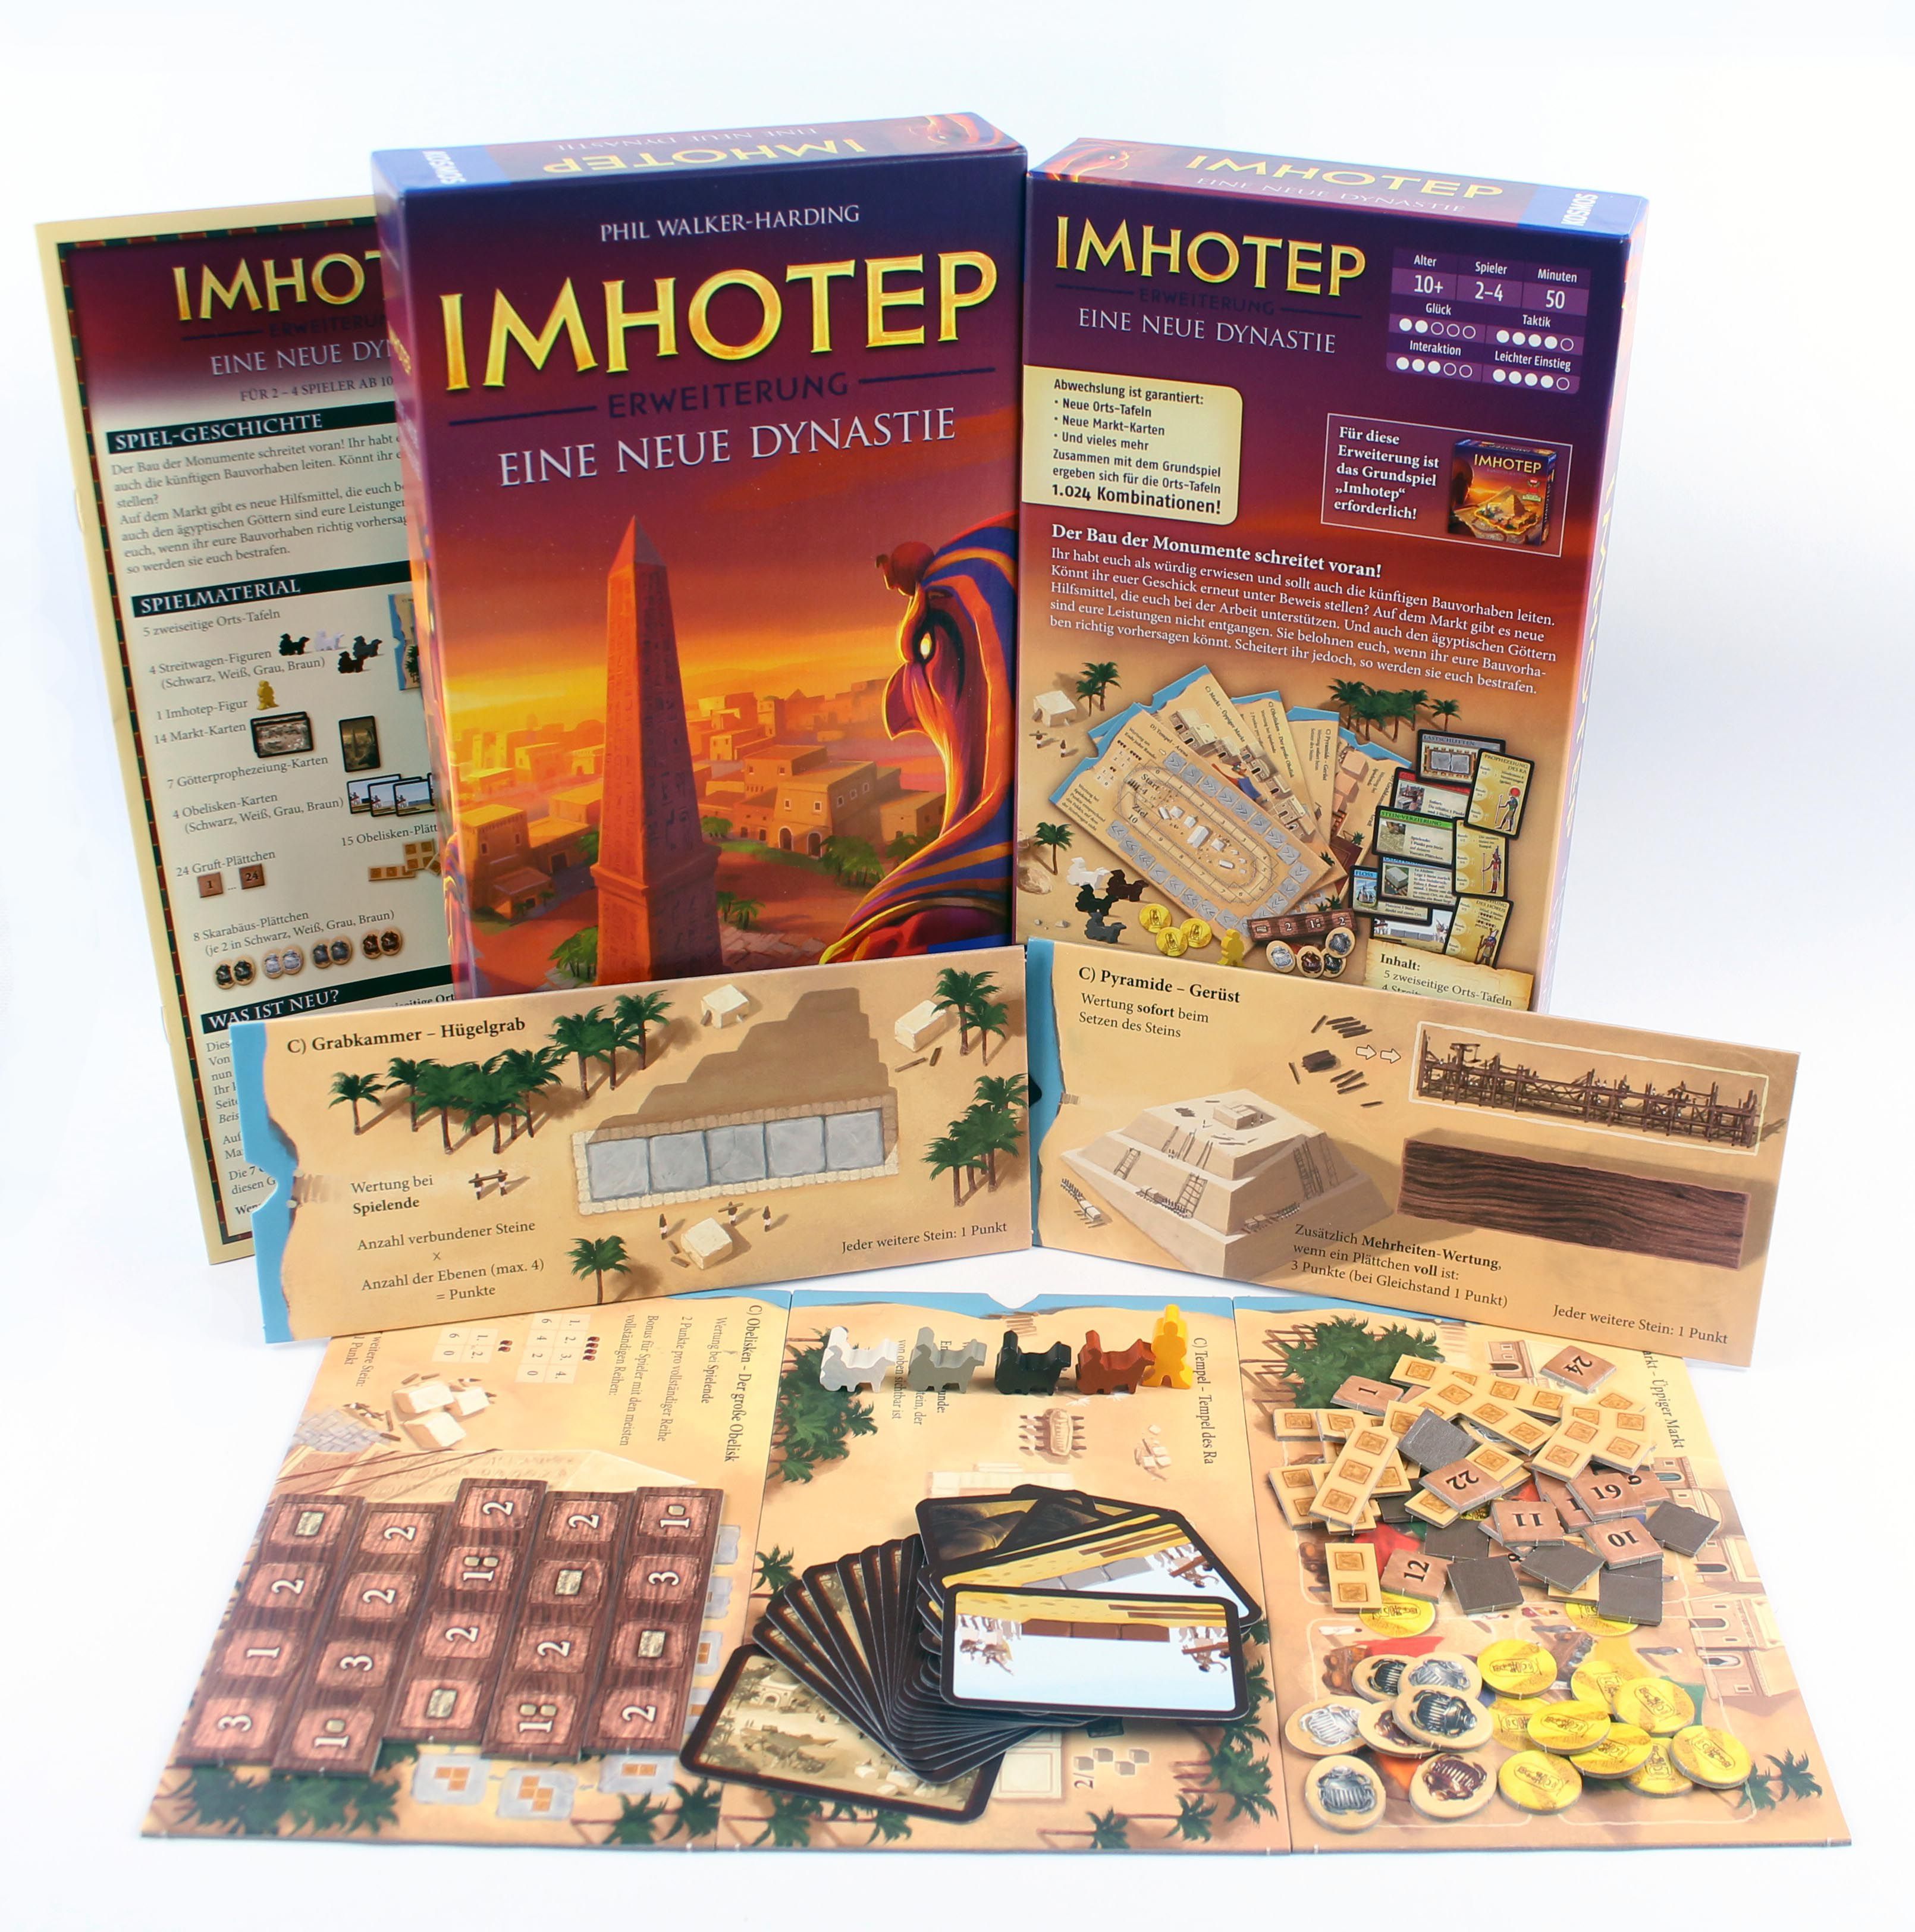 Imhotep A New Dynasty Image Boardgamegeek